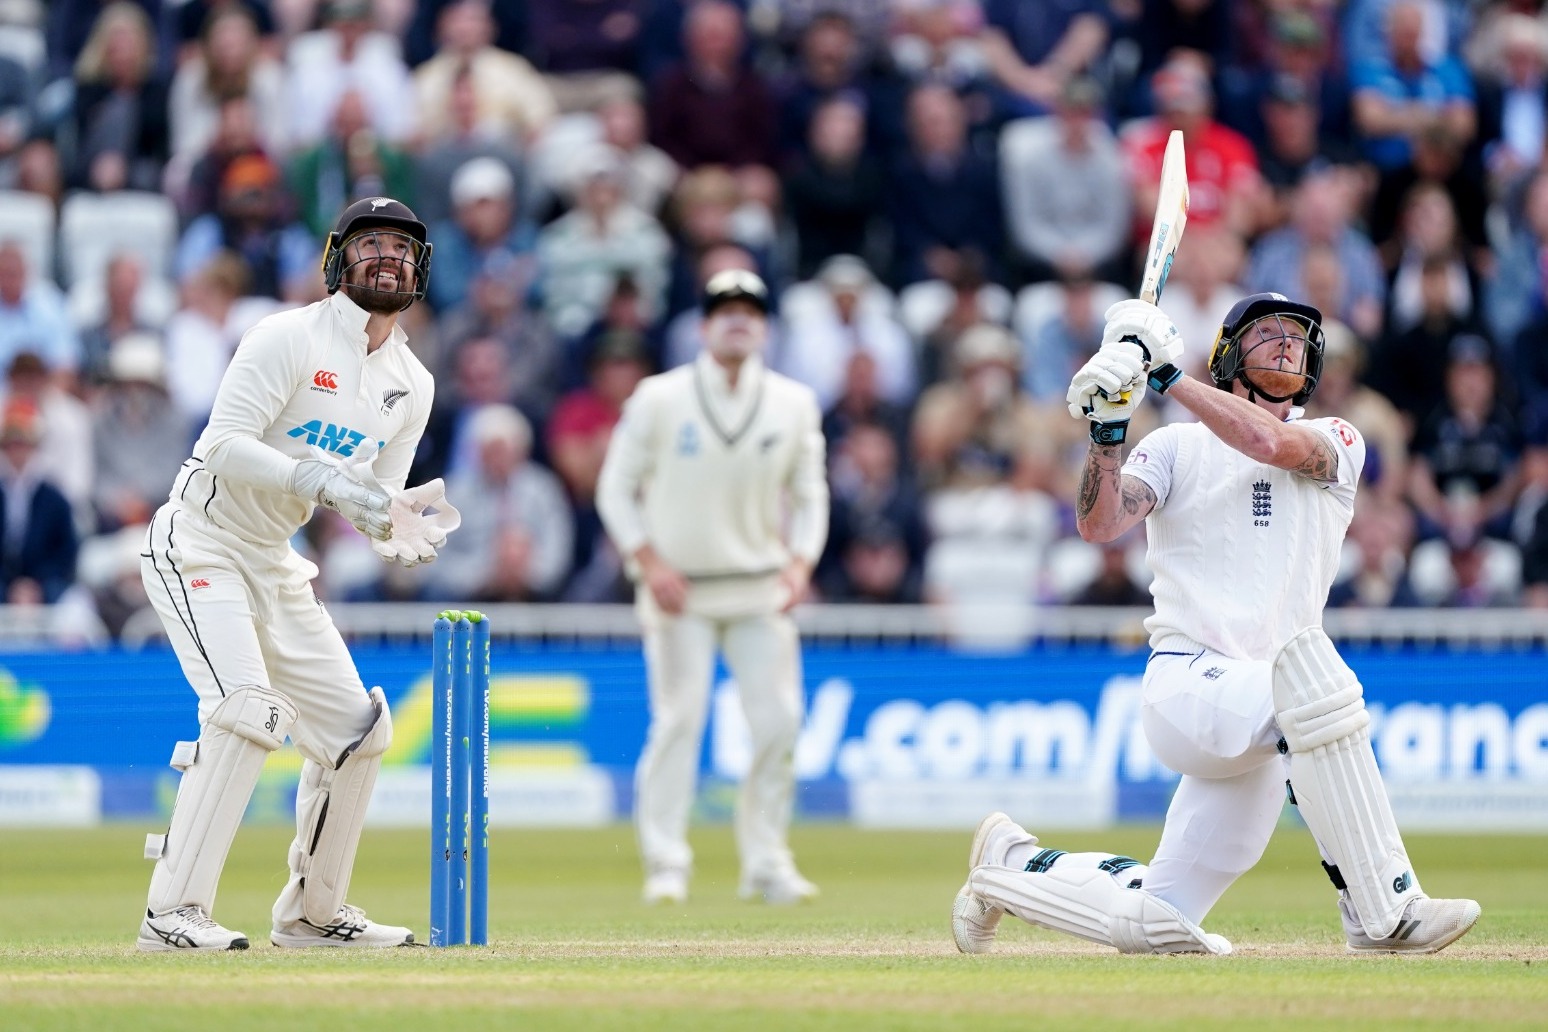 Joe Root and Ollie Pope help England turn tables on New Zealand in second Test 